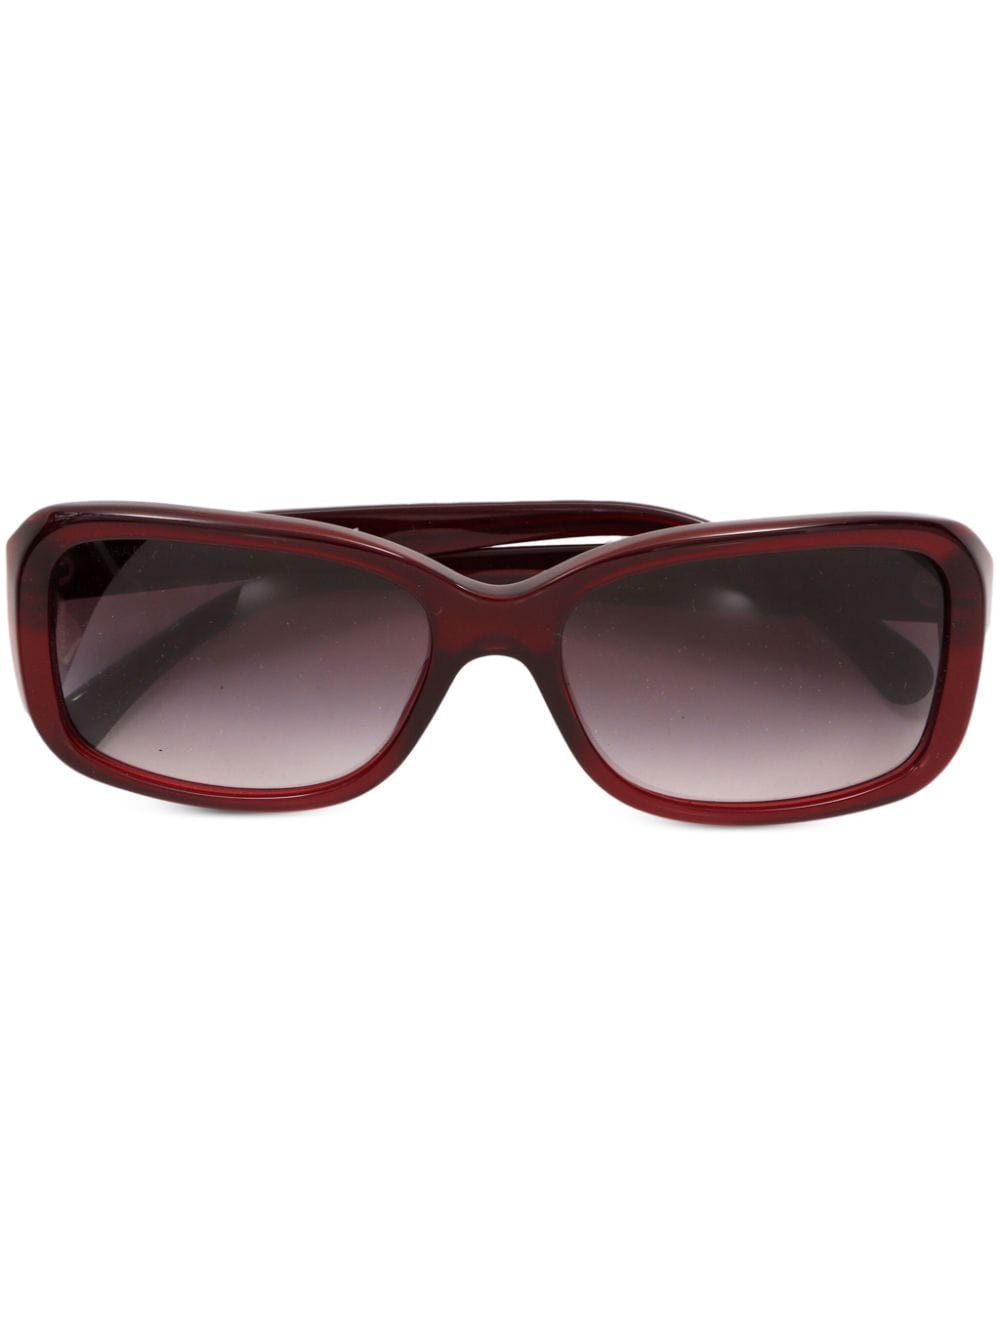 CHANEL Pre-Owned 2000s camellia print rectangle-framed sunglasses - Brown von CHANEL Pre-Owned